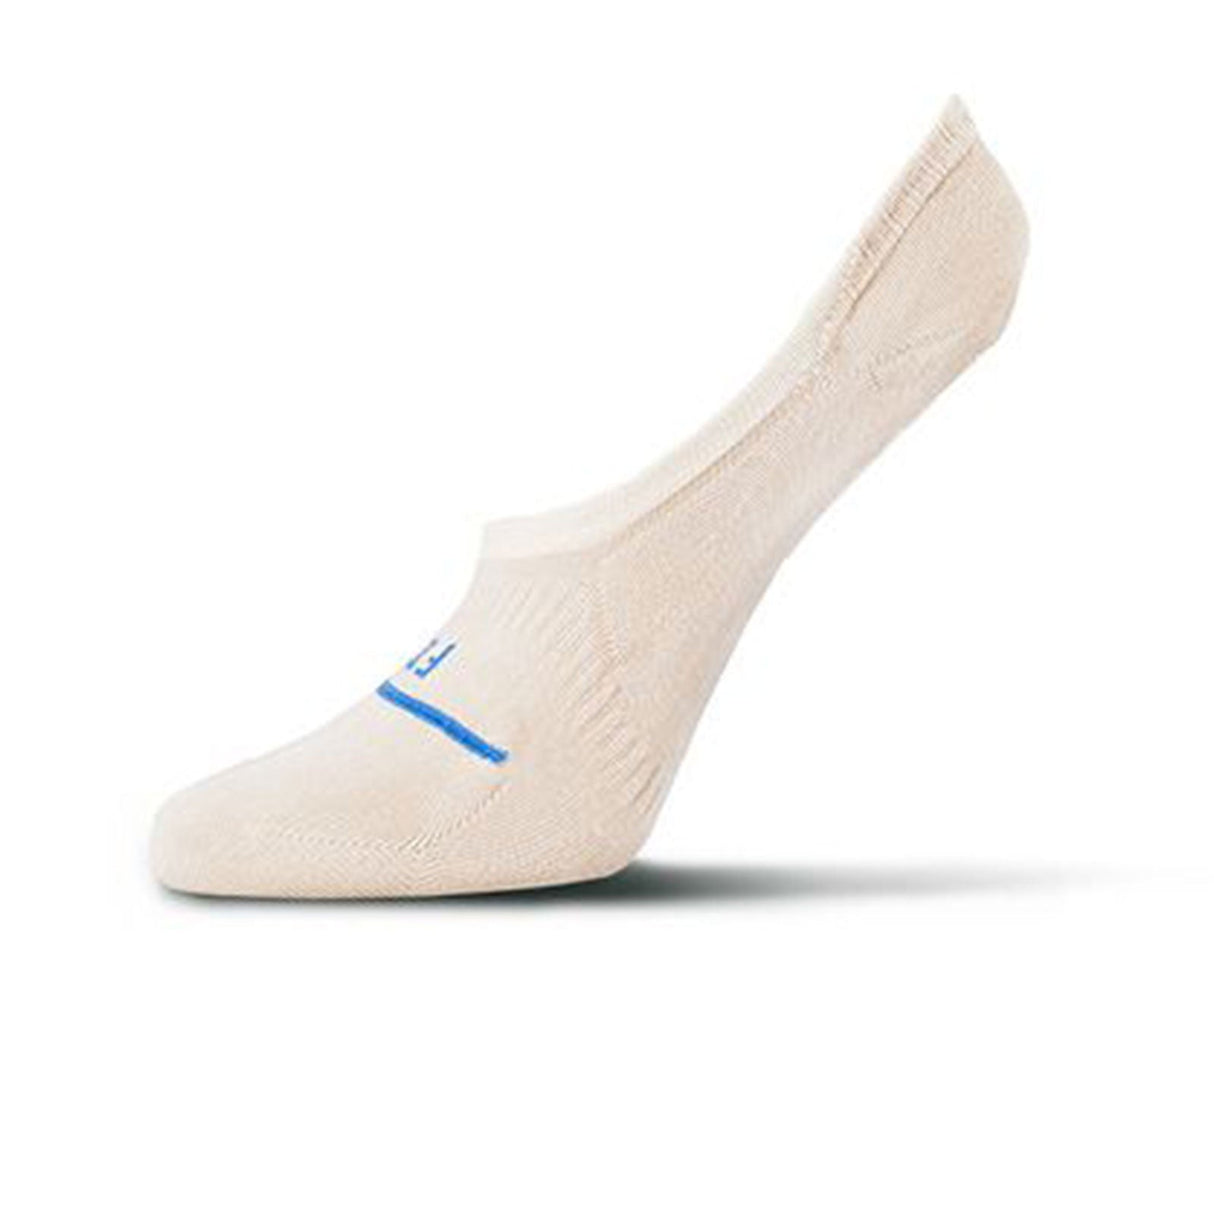 Fits F5075 Invisible No Show Sock (Unisex) - Beige Accessories - Socks - Lifestyle - The Heel Shoe Fitters